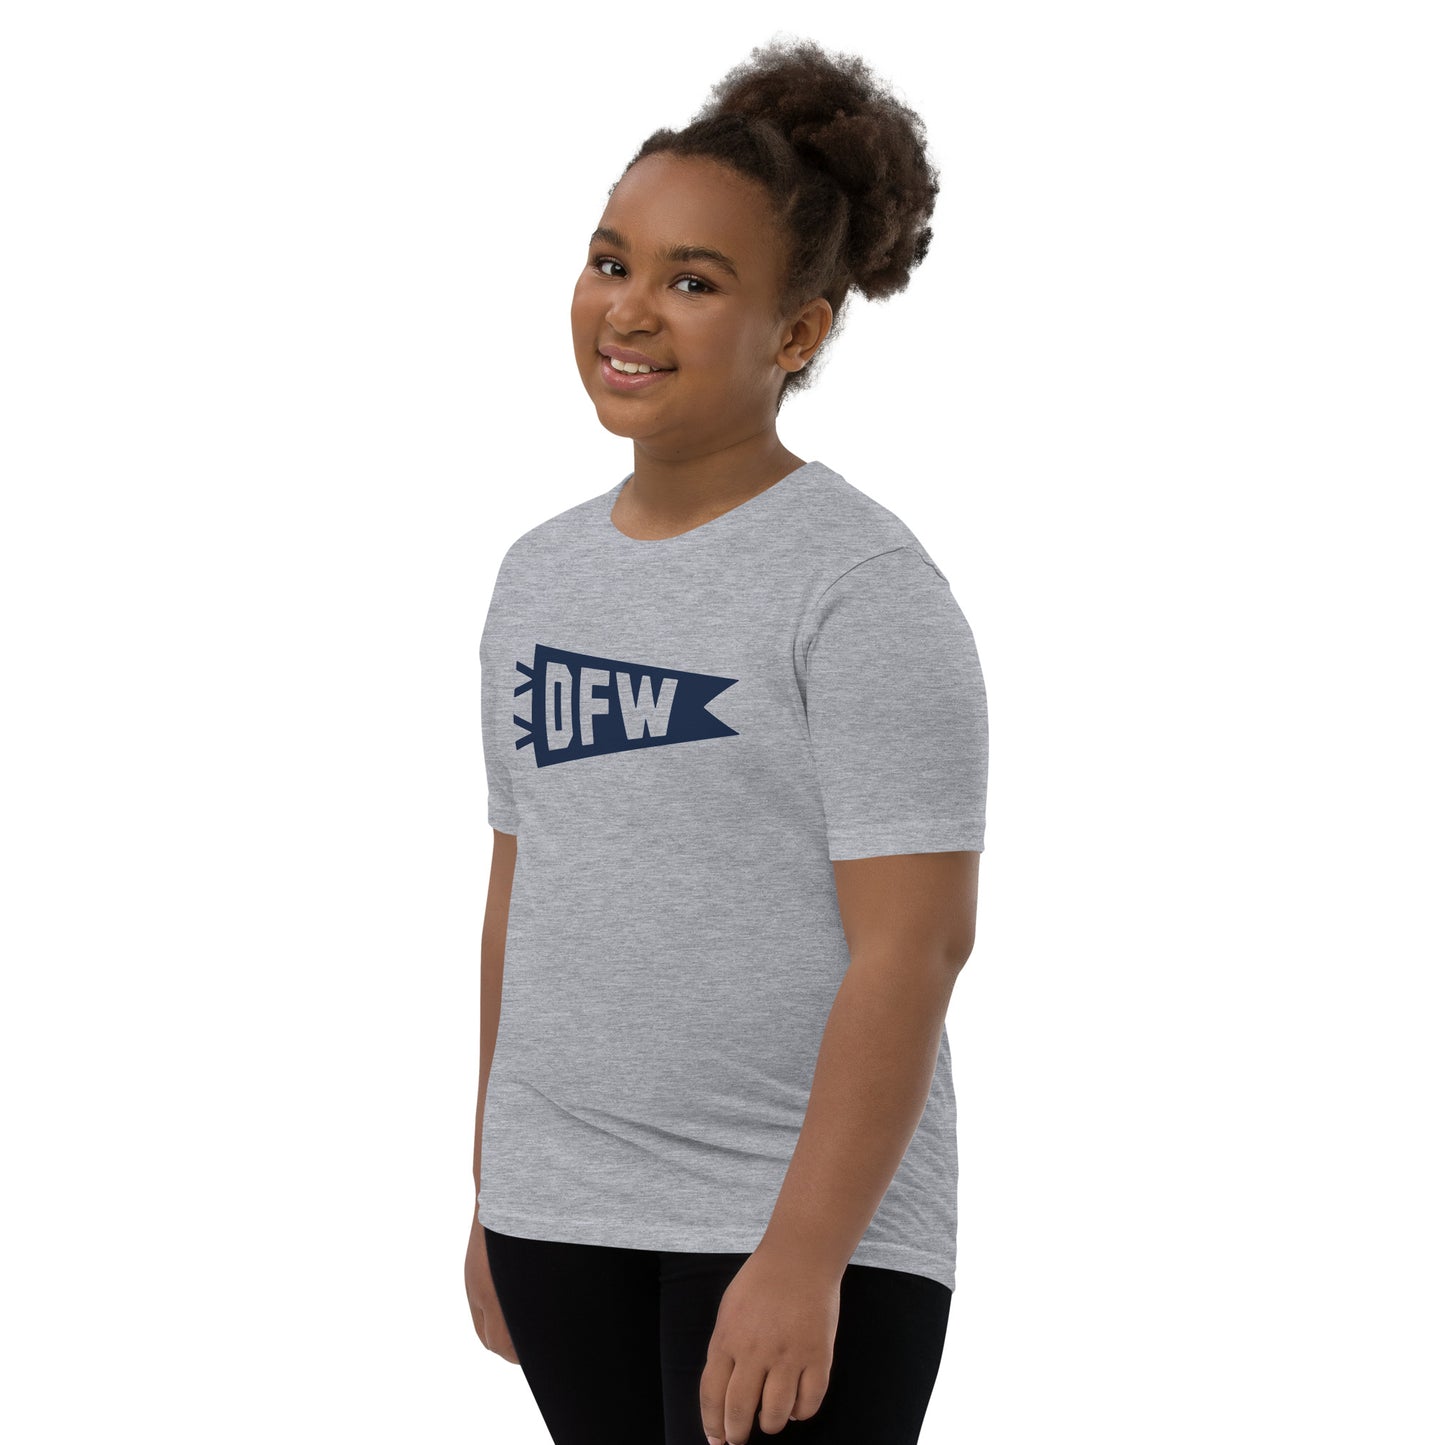 Kid's Airport Code Tee - Navy Blue Graphic • DFW Dallas • YHM Designs - Image 04